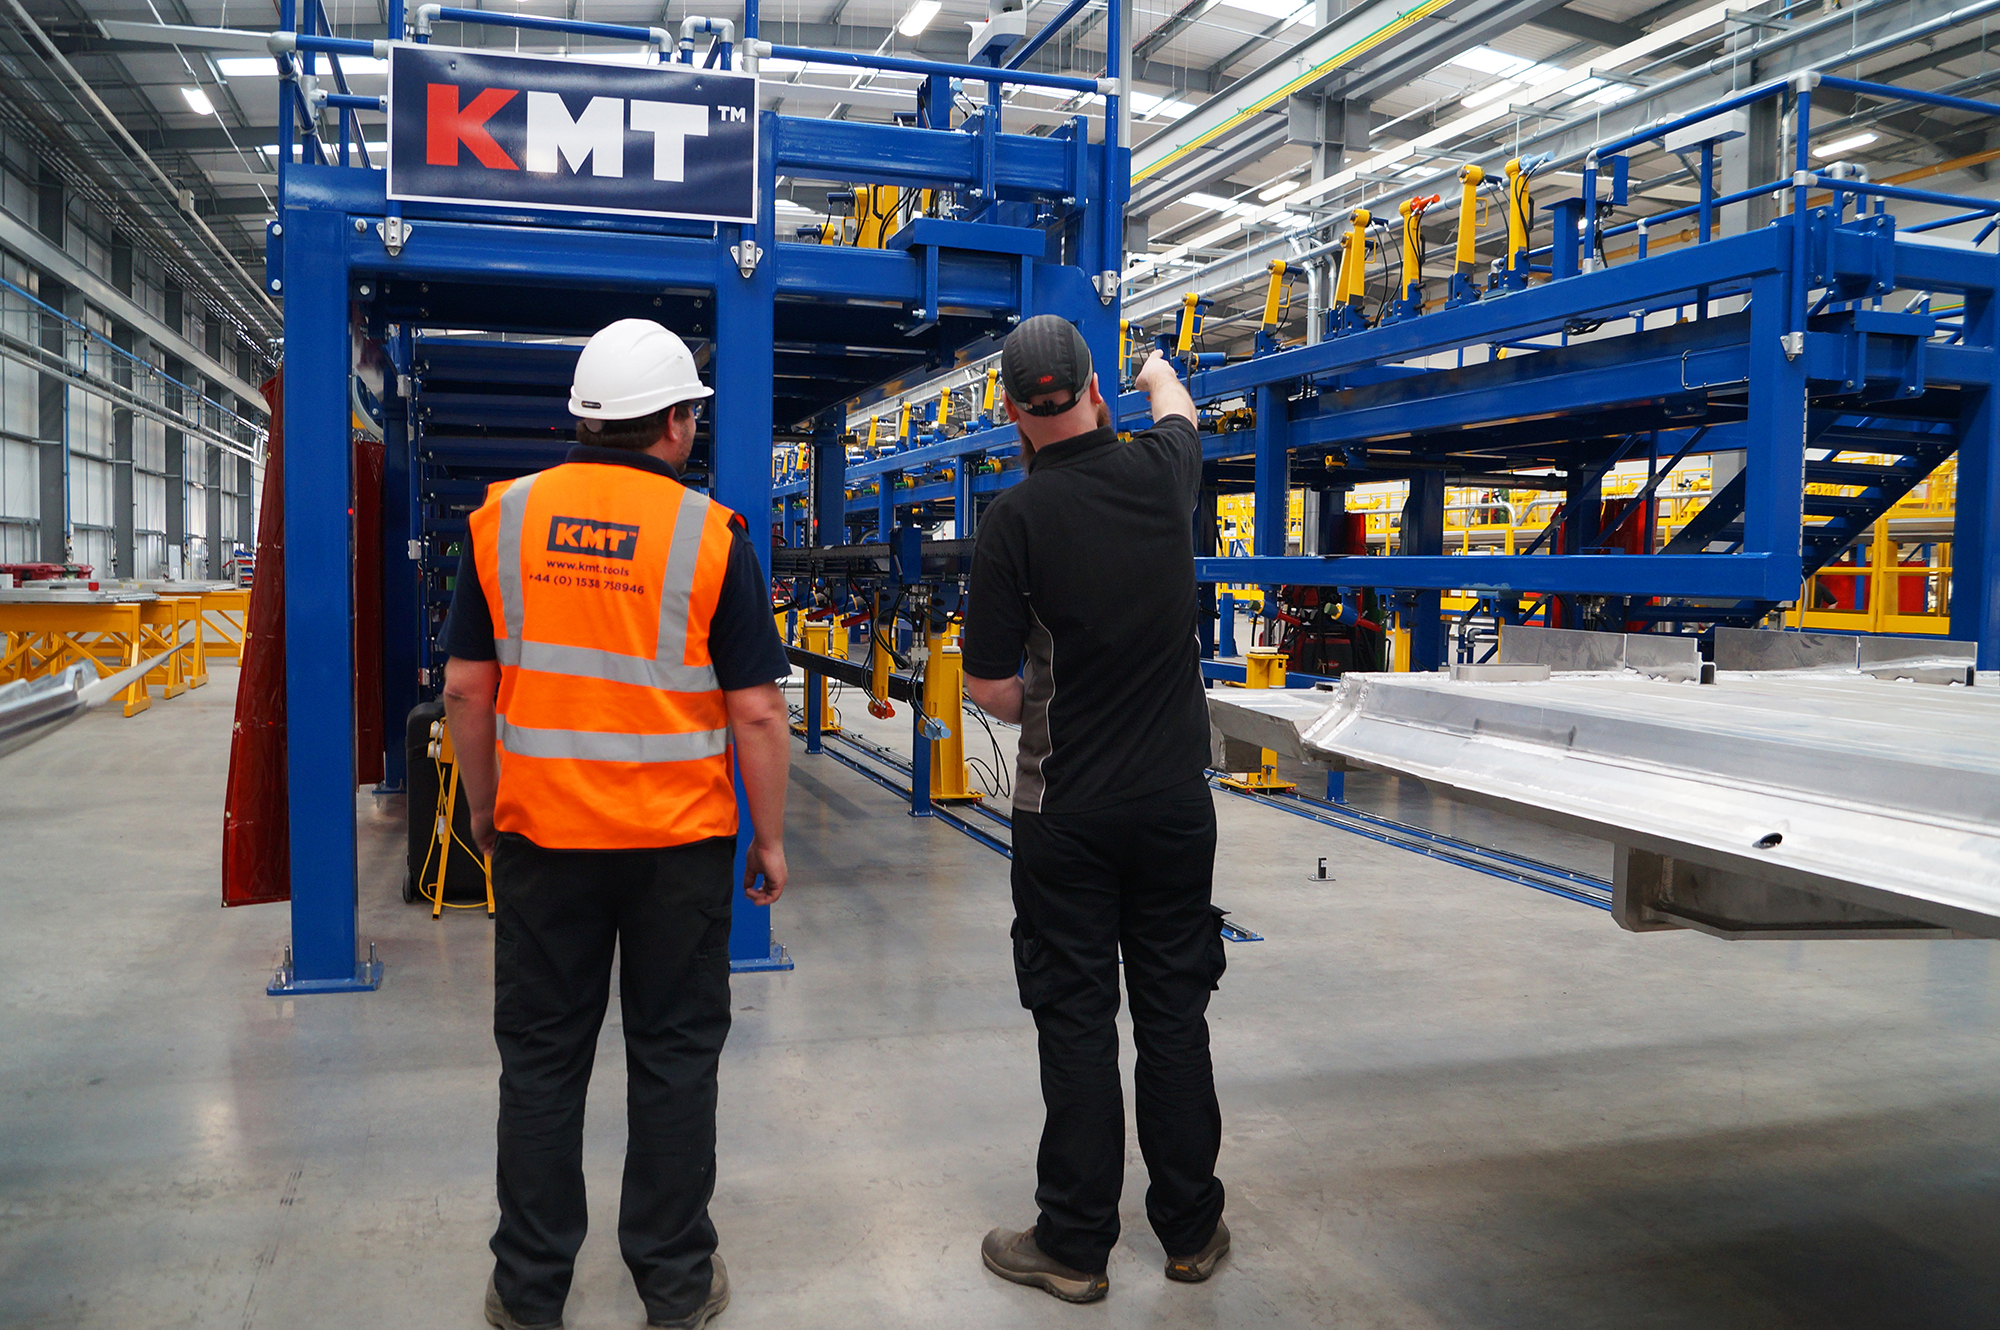 KMT experts can provide installation and maintenance services to ensure maximum uptime for production equipment